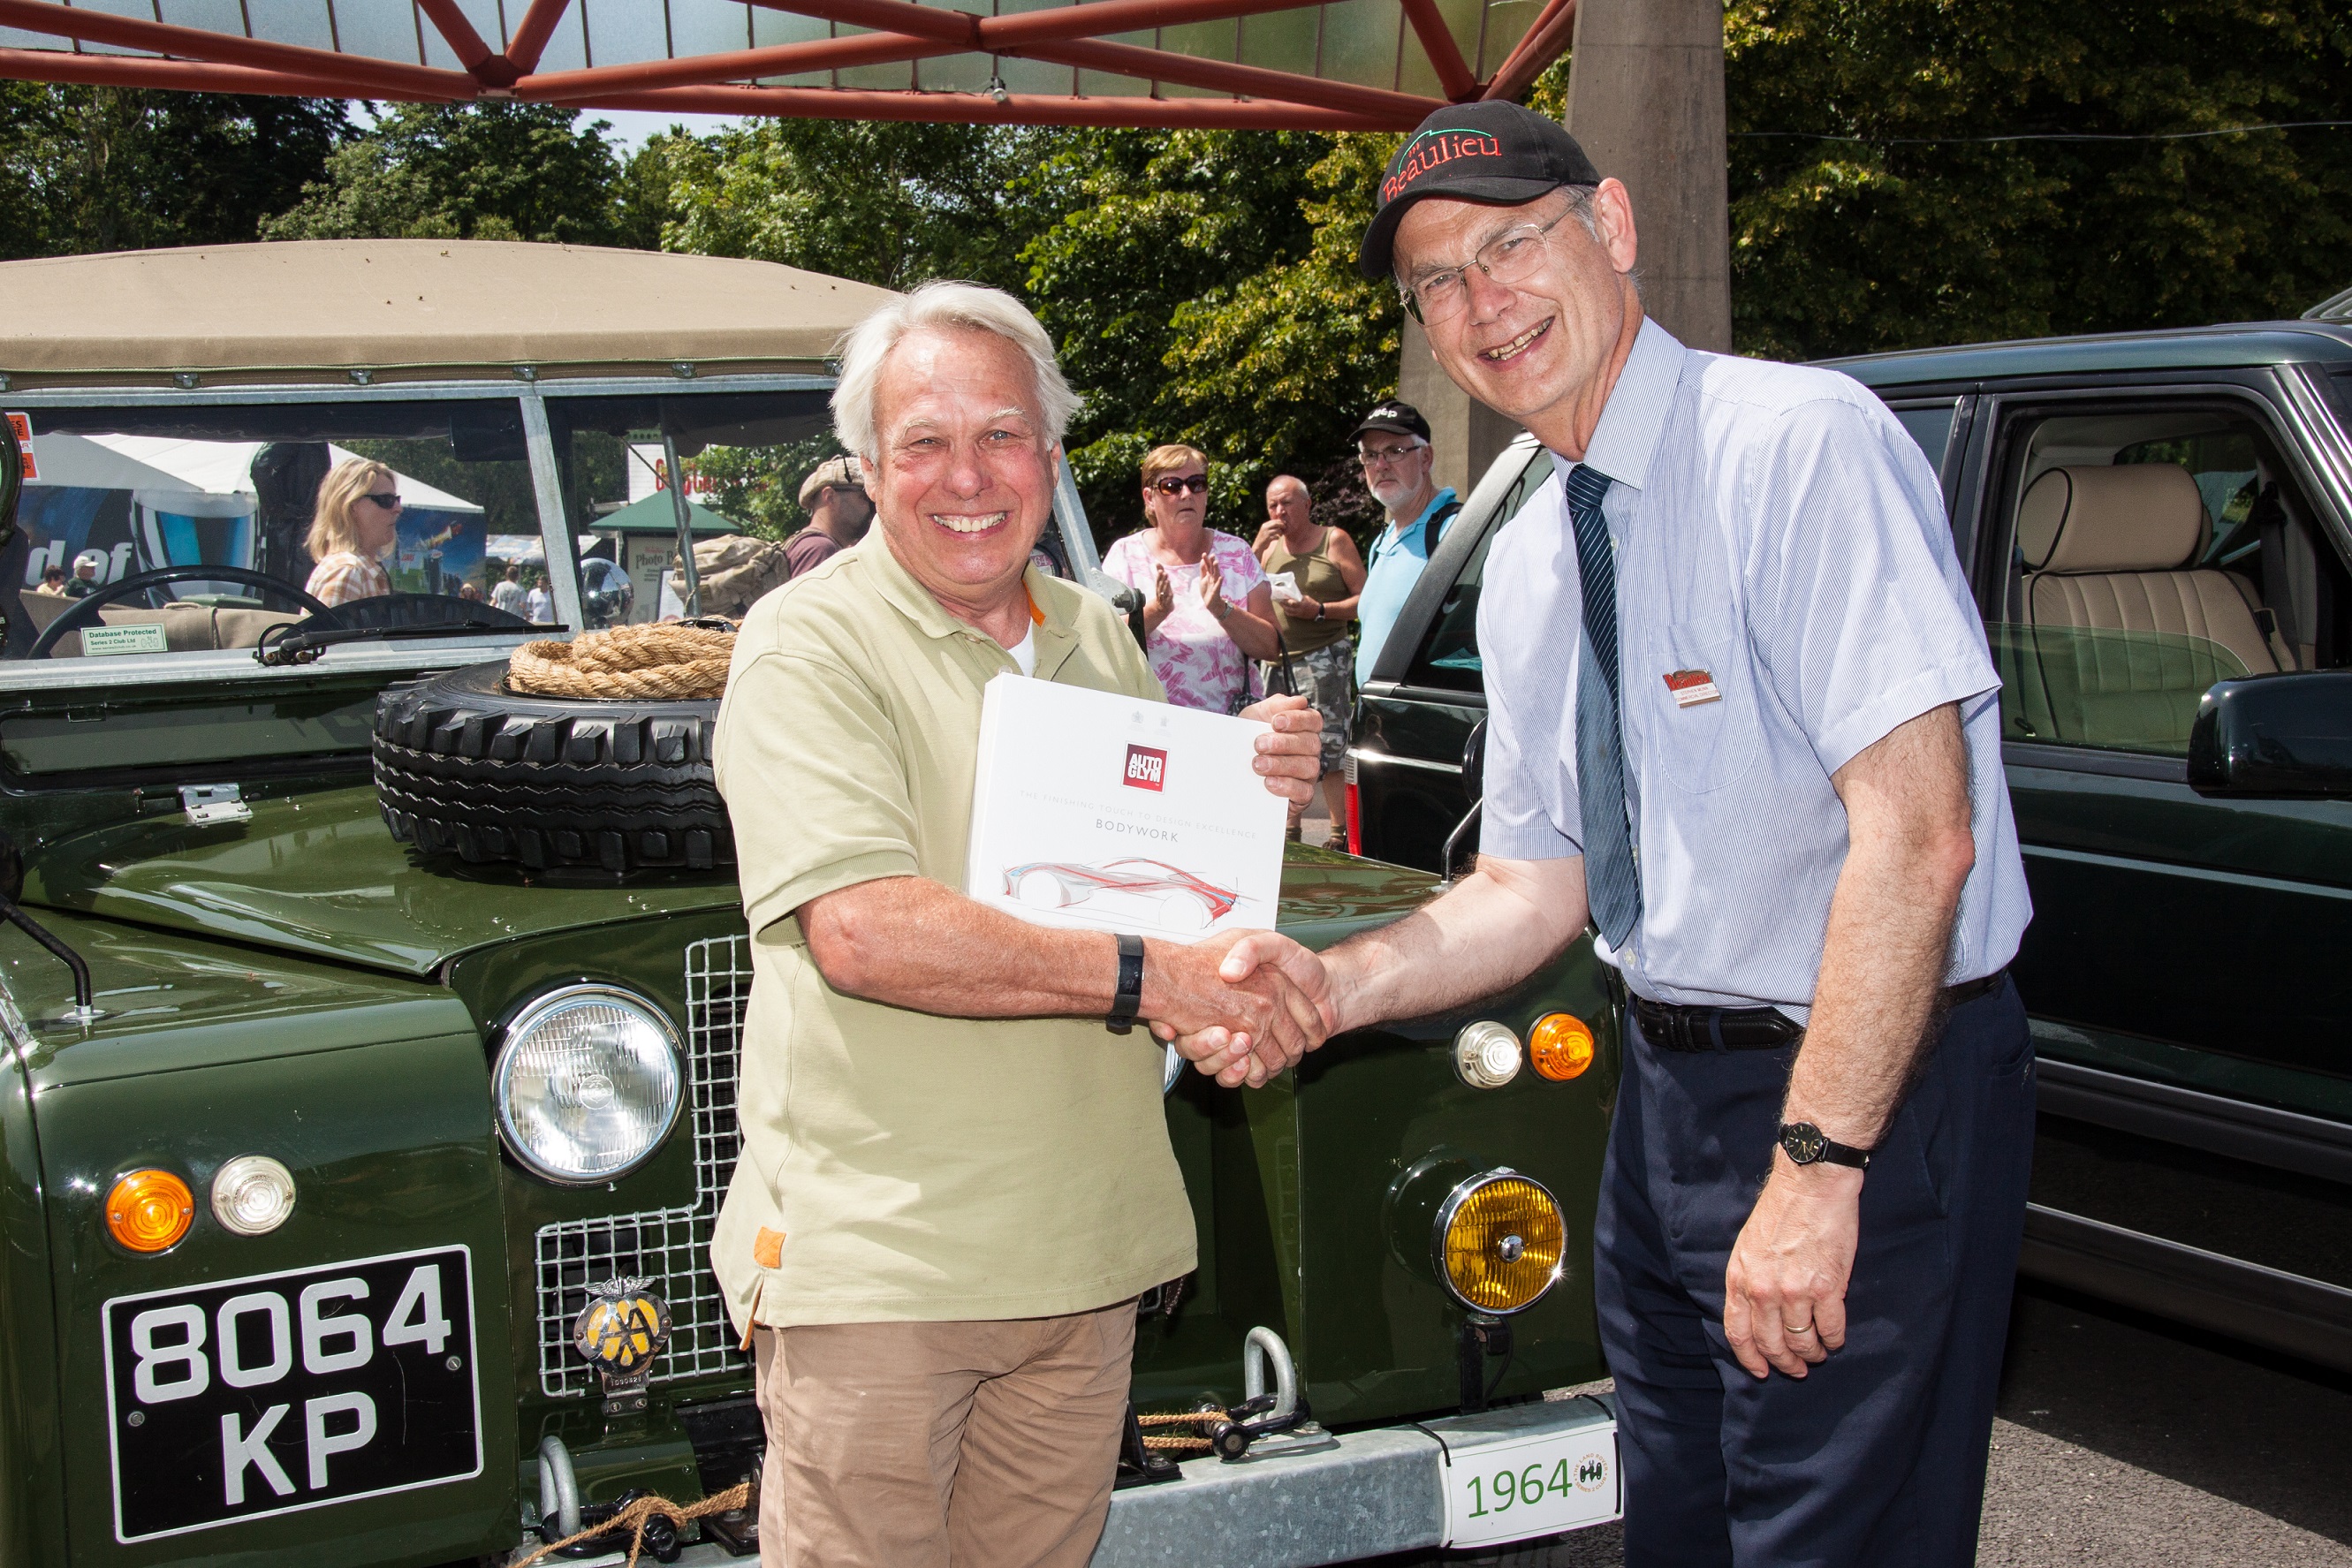 Simply Land Rover People's Choice runner up Christopher Pendred being presented with prize by Beaulieu Commercial Director Steve Munn